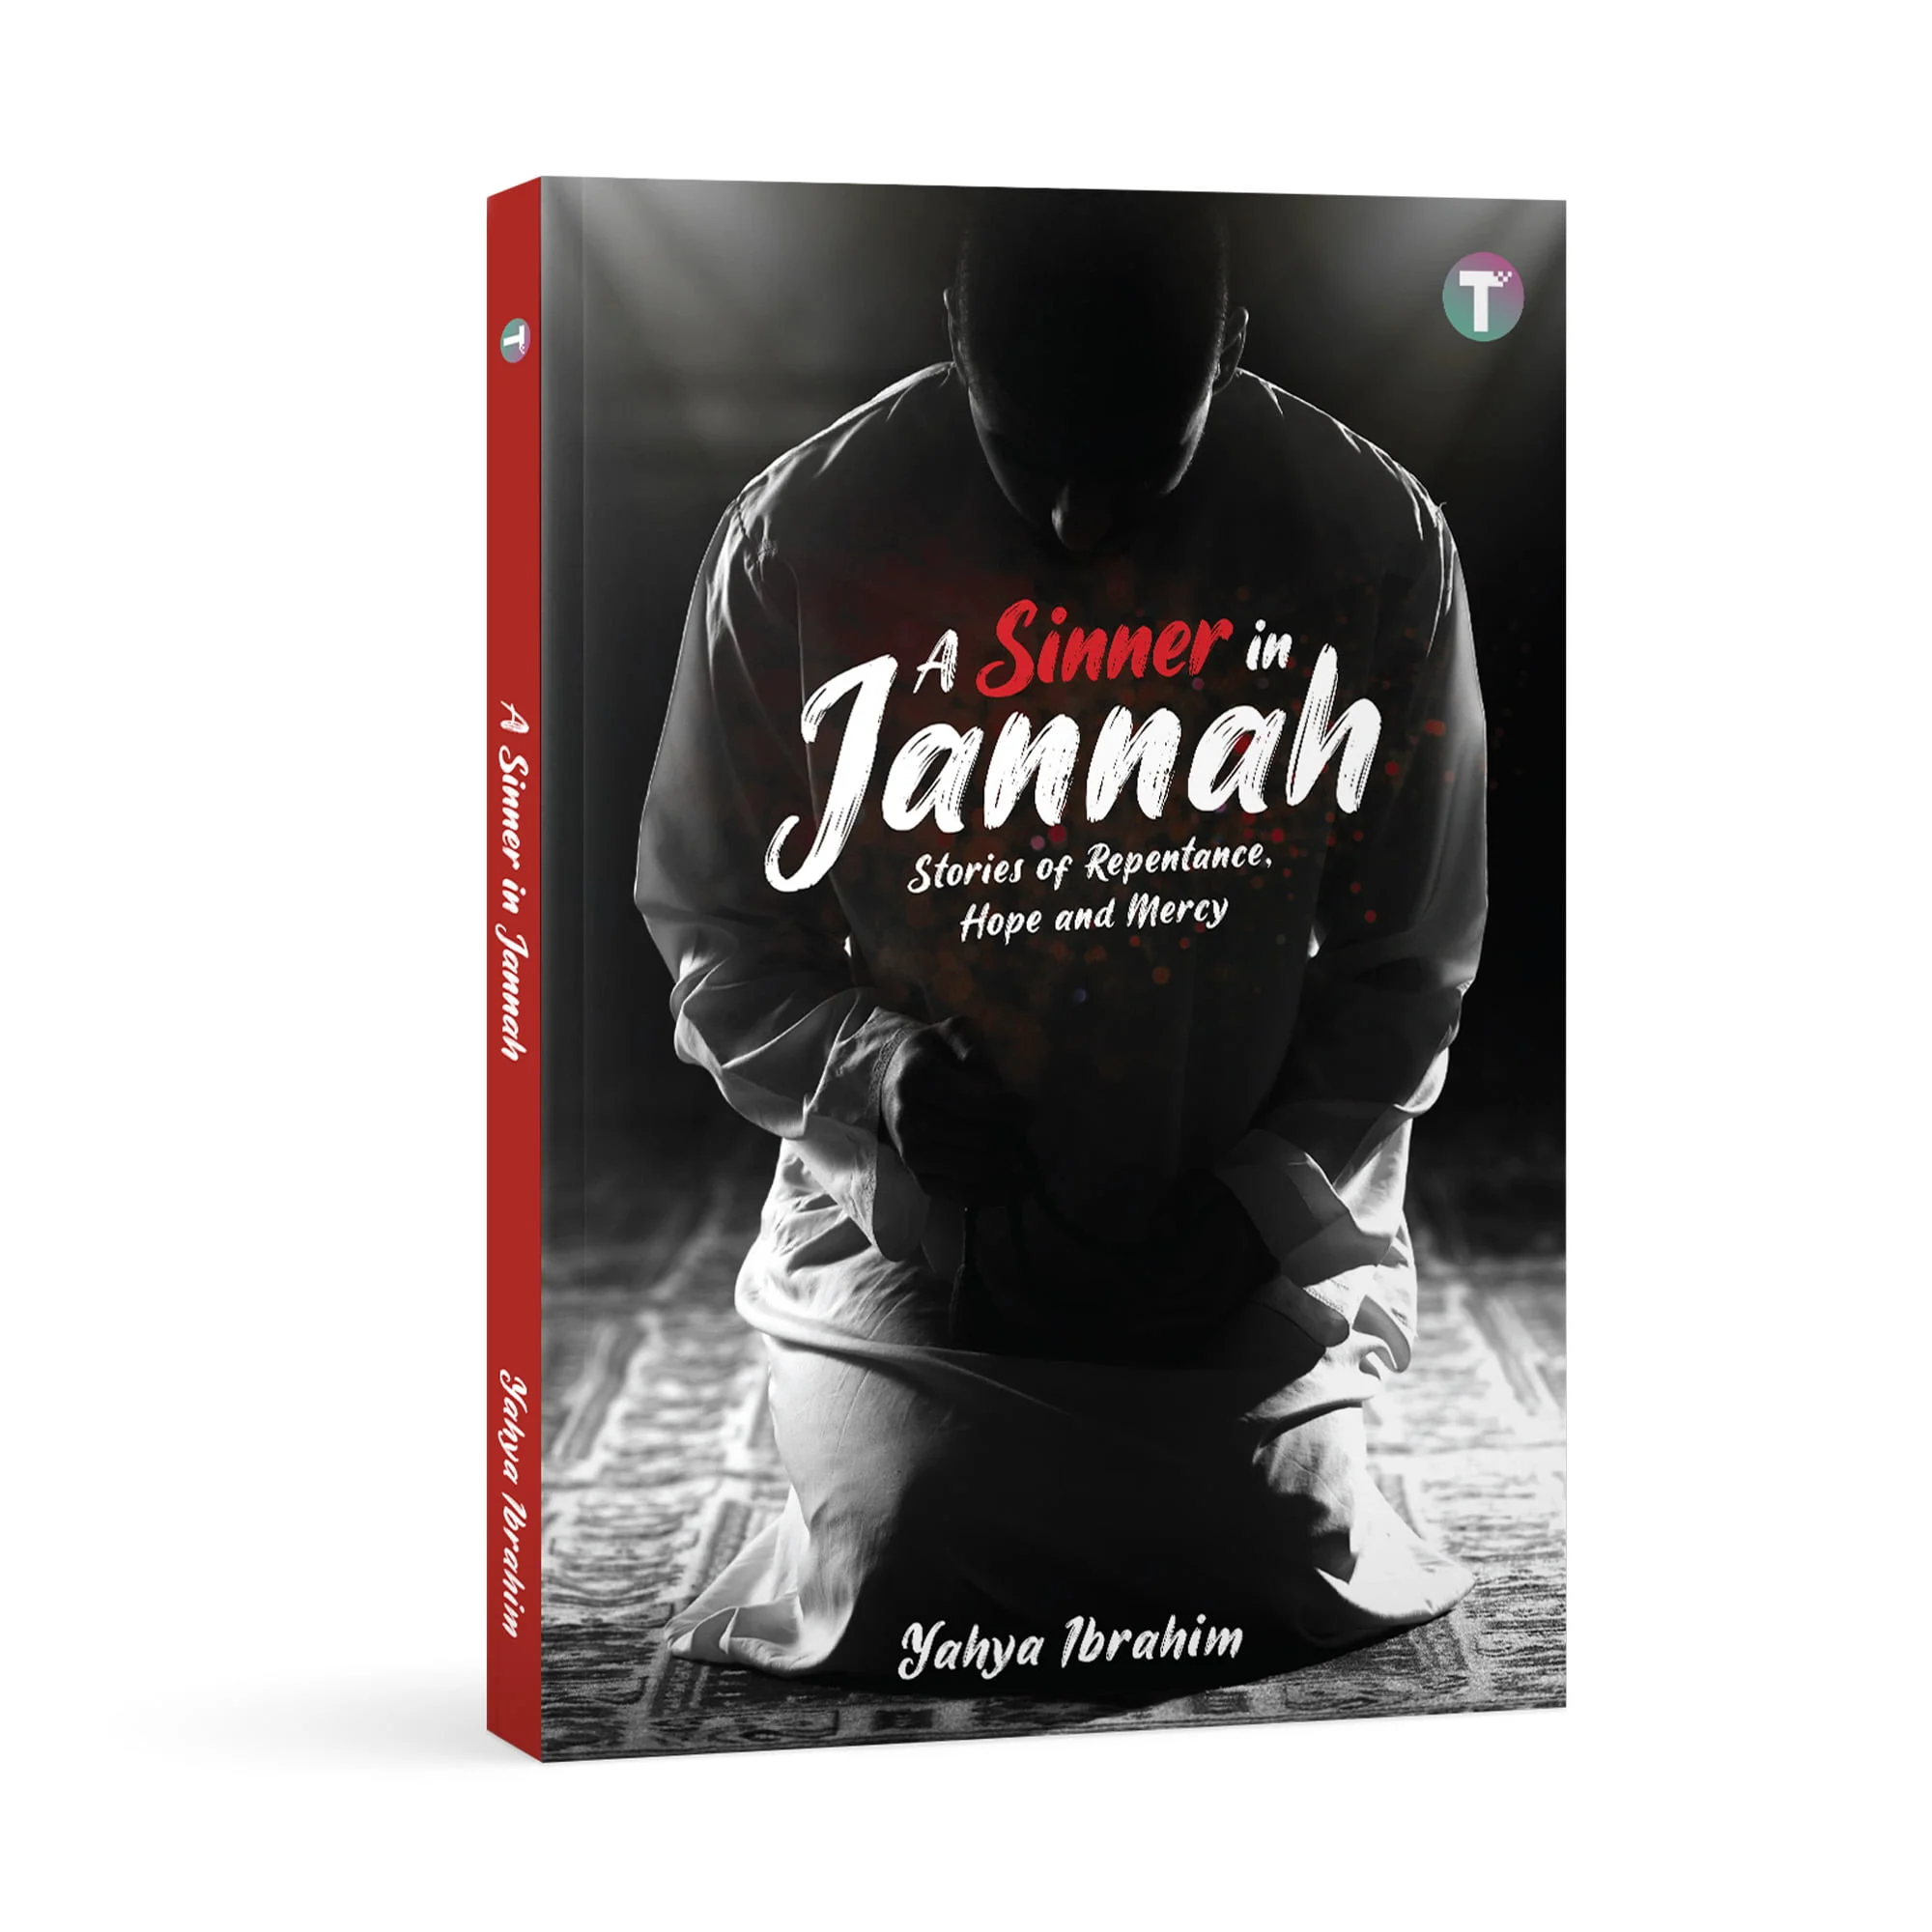 A Sinner in Jannah: Stories of Repentance, Hope and Mercy by Yahya Ibrahim